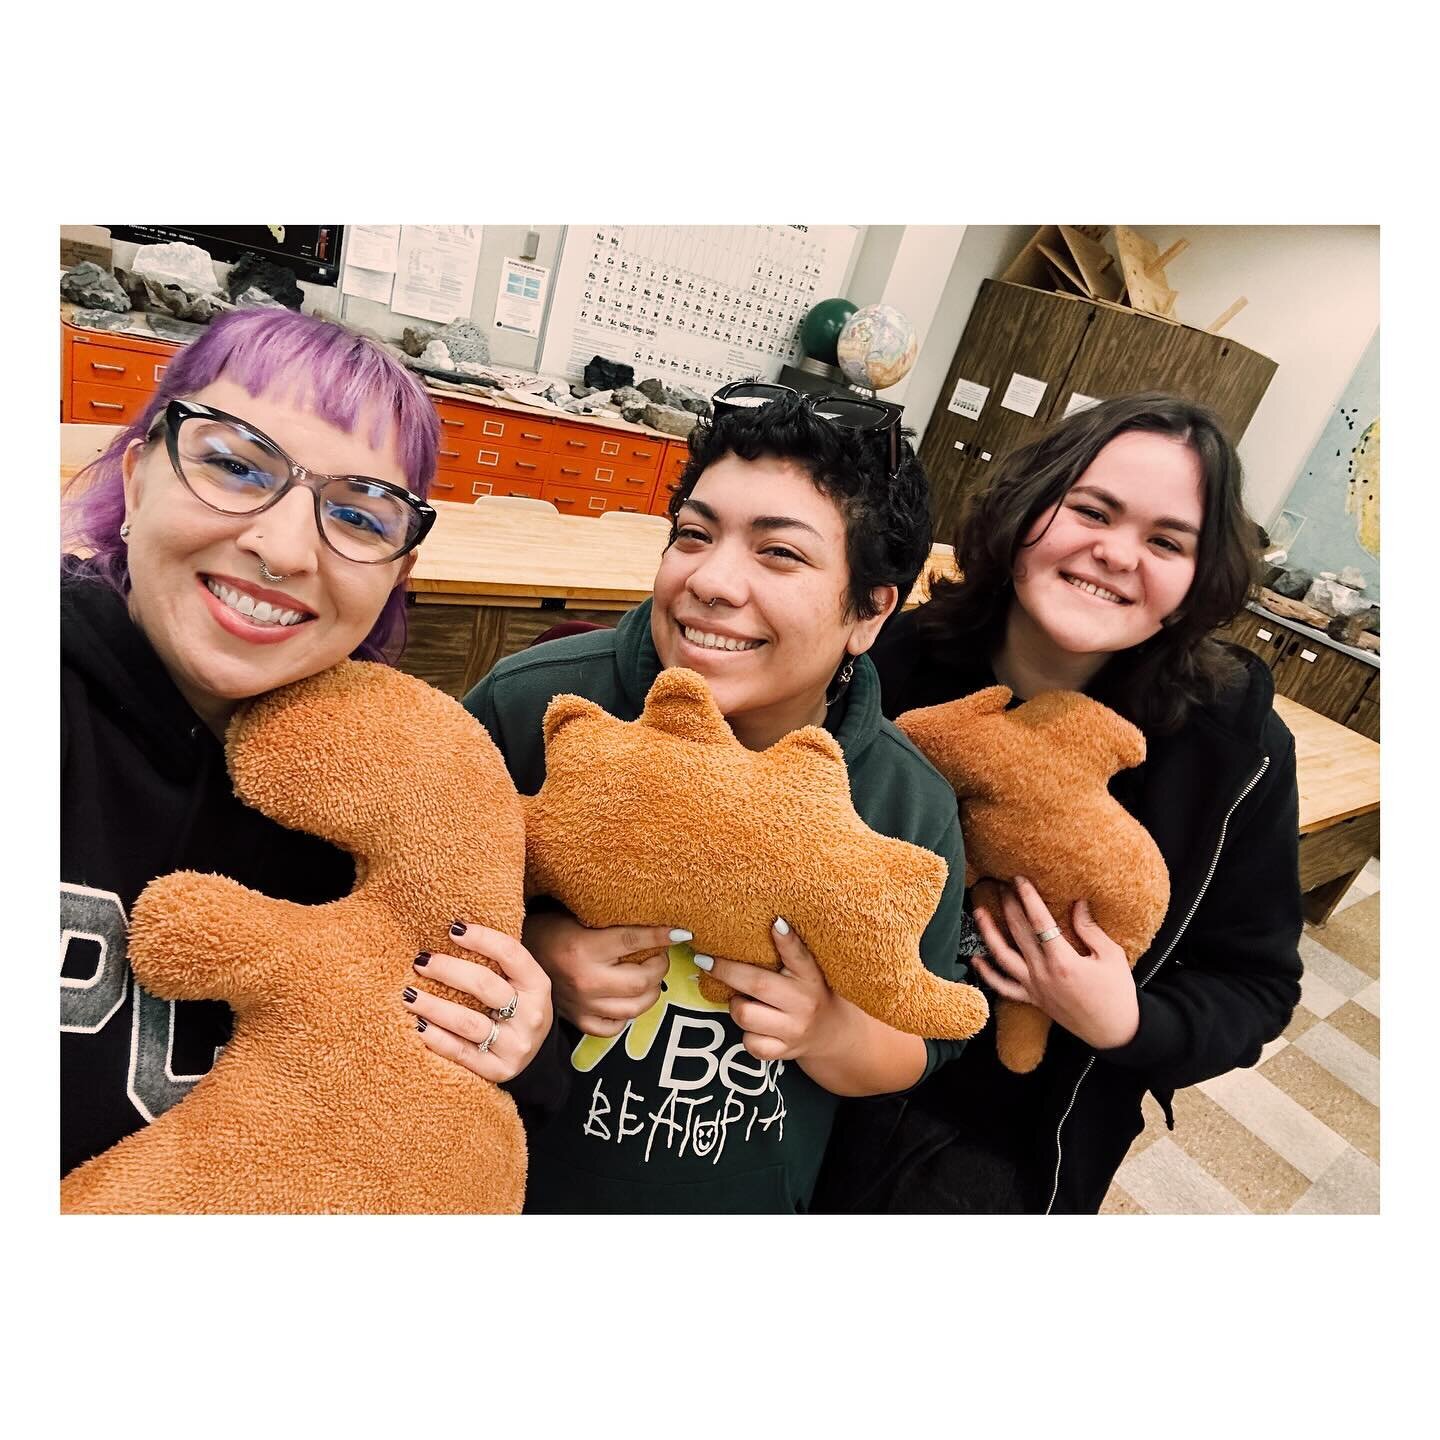 Dino Nuggie Pillows today in our 7am Dino class. Cannot even begin to describe how pleased I am to have made friends with @pantomimestitches and @_marina_xox_ - two incredibly smart and incredibly funny geo nerds that I absolutely adore. 🖤🦖🤓
.
.
.